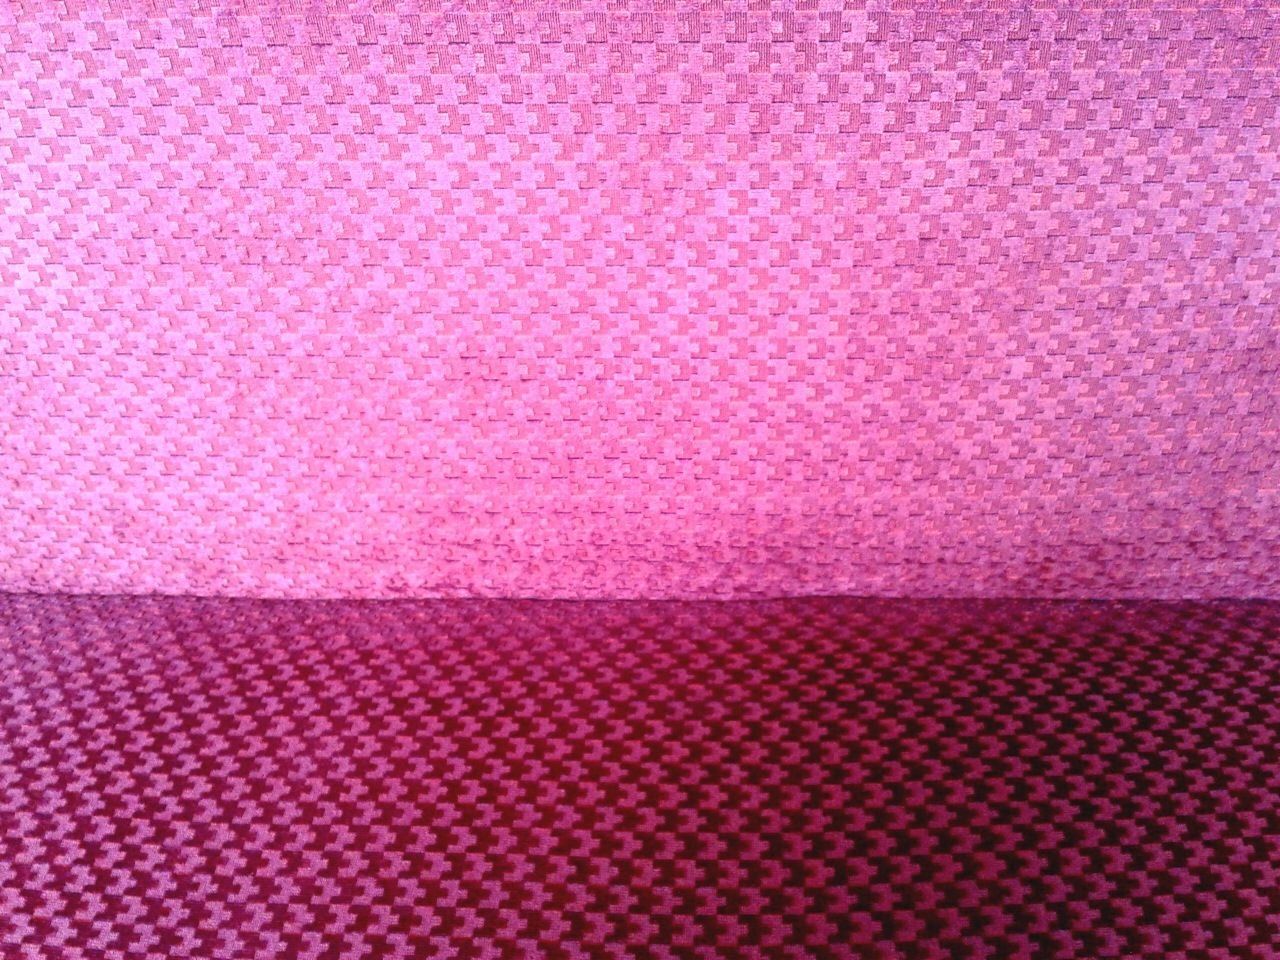 Full frame of pink fabric